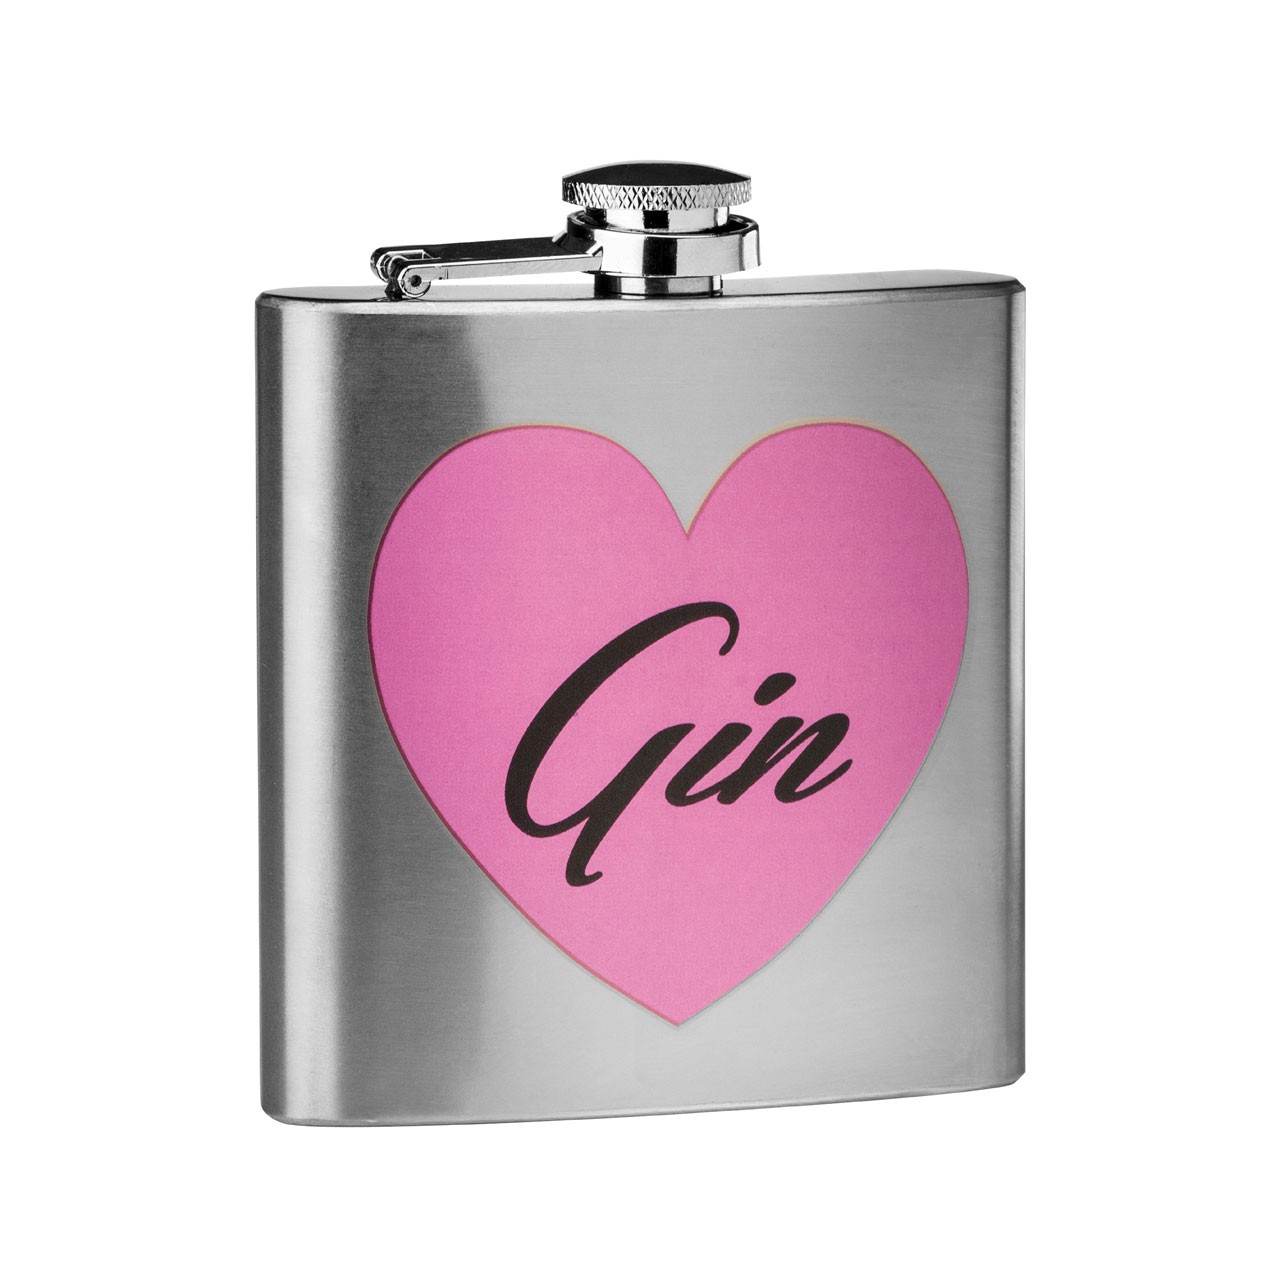 6 oz Stainless Steel Gin Design Hip Flask